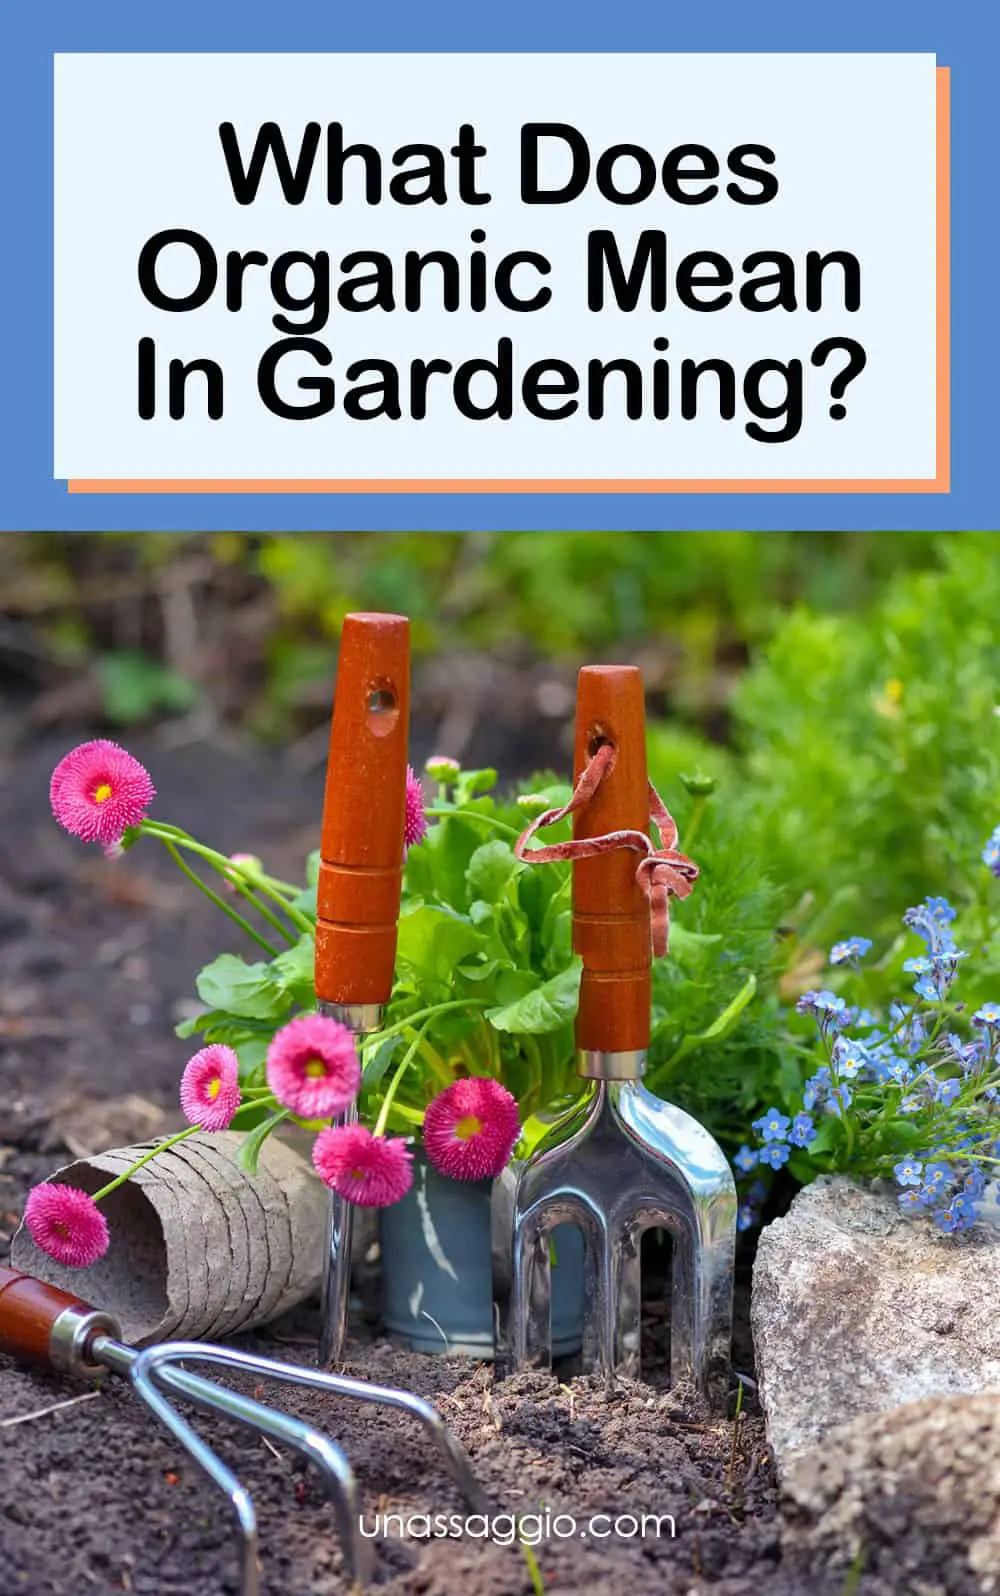 What Does Organic Mean In Gardening?